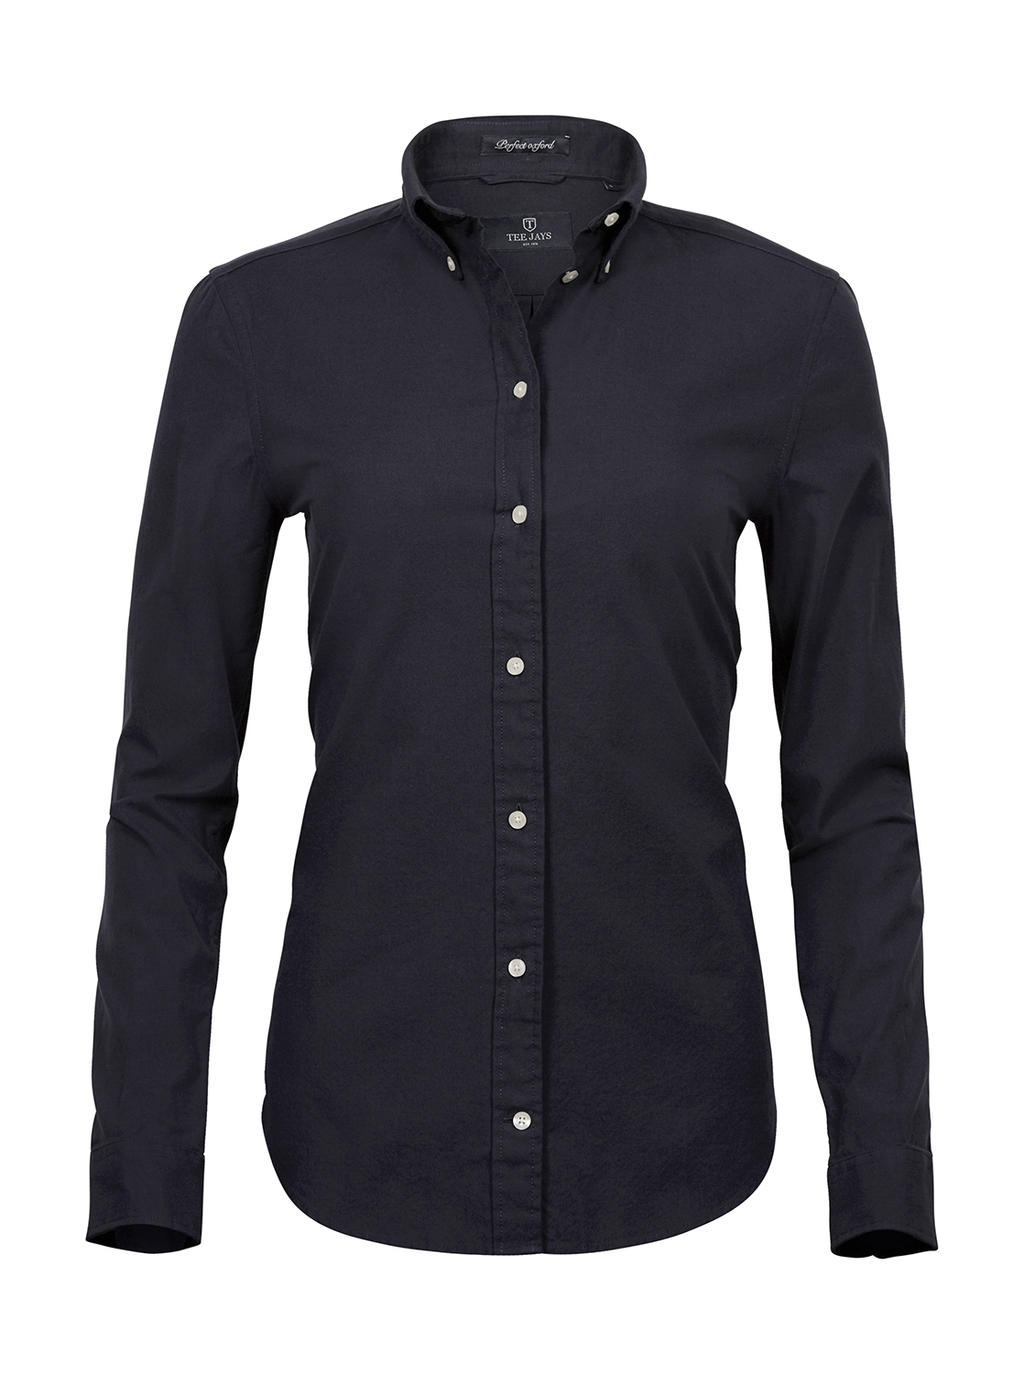  Ladies Perfect Oxford Shirt in Farbe Black